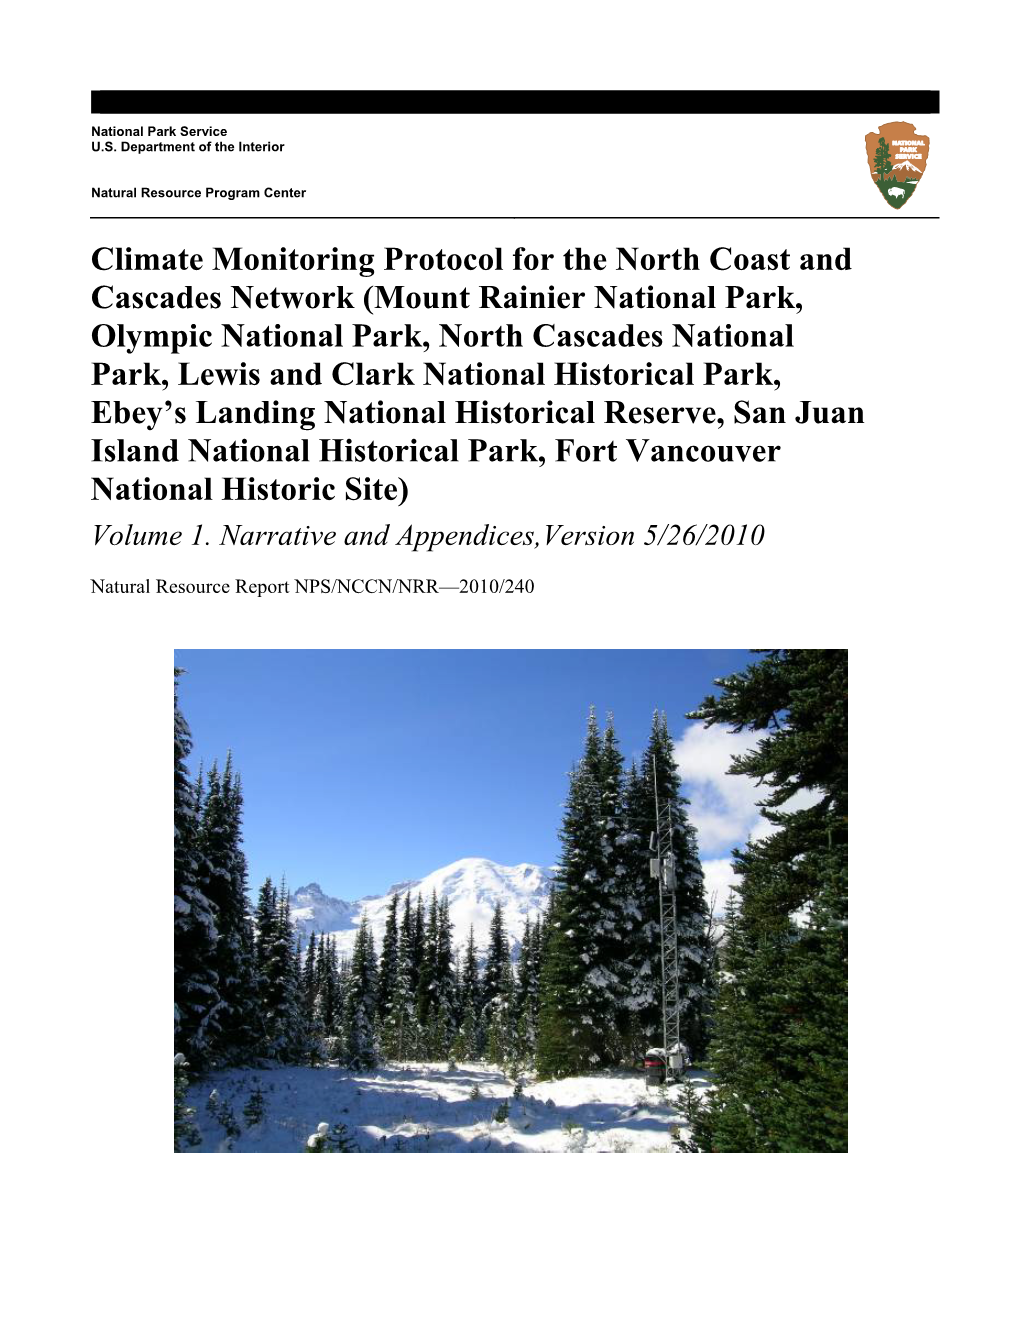 Climate Monitoring Protocol for the North Coast and Cascades Network